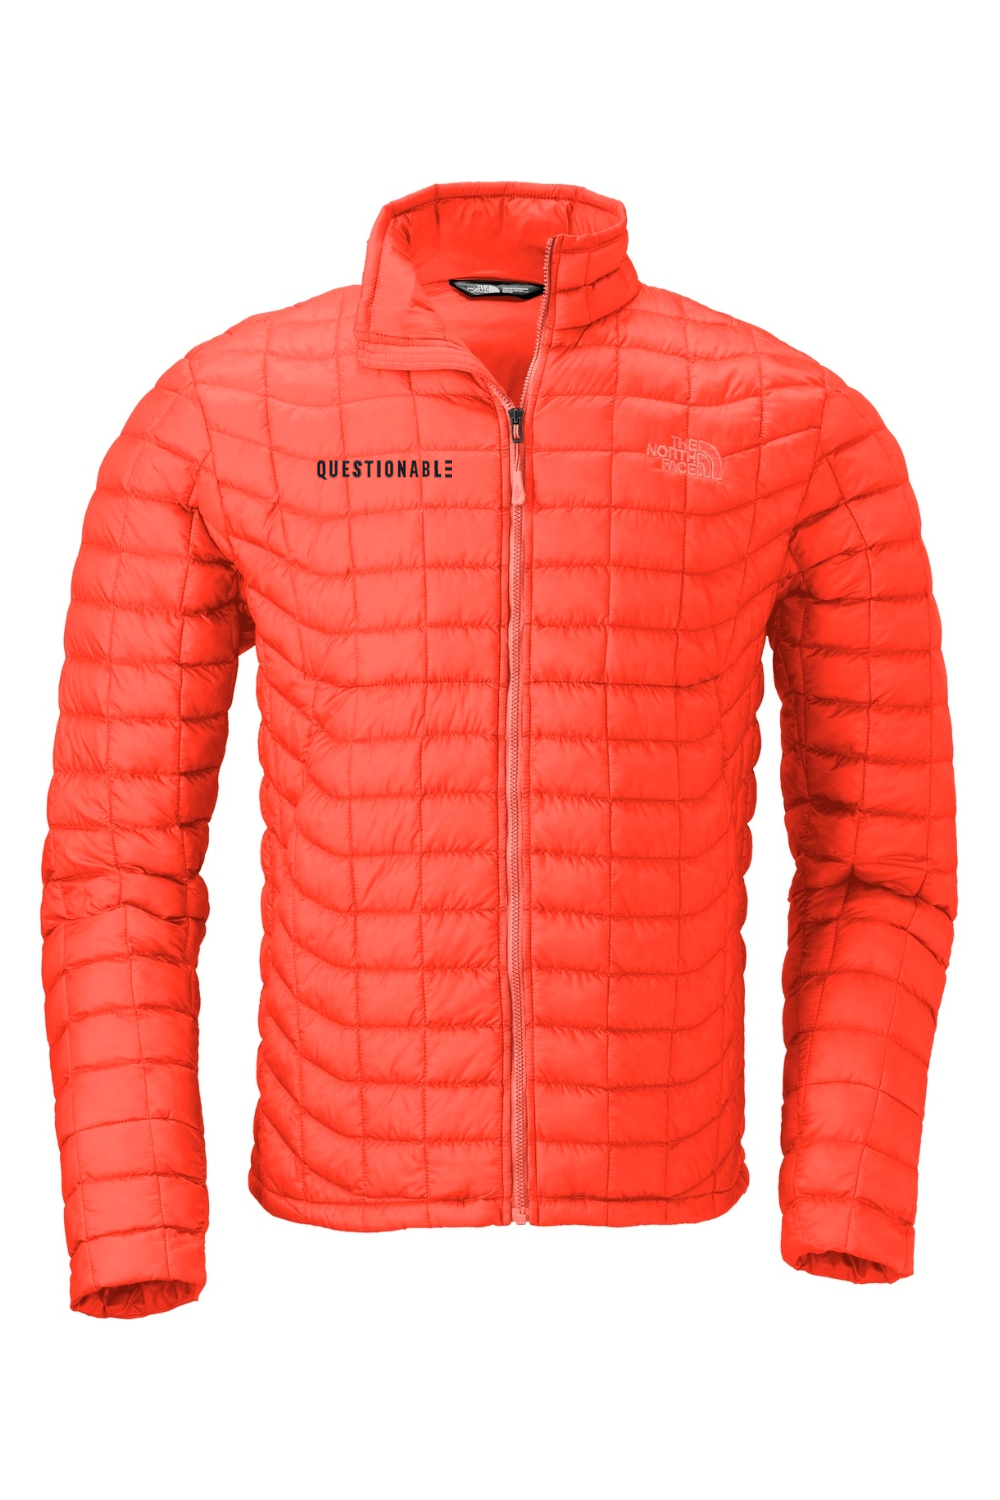 Questionable - The North Face ThermoBall Jacket